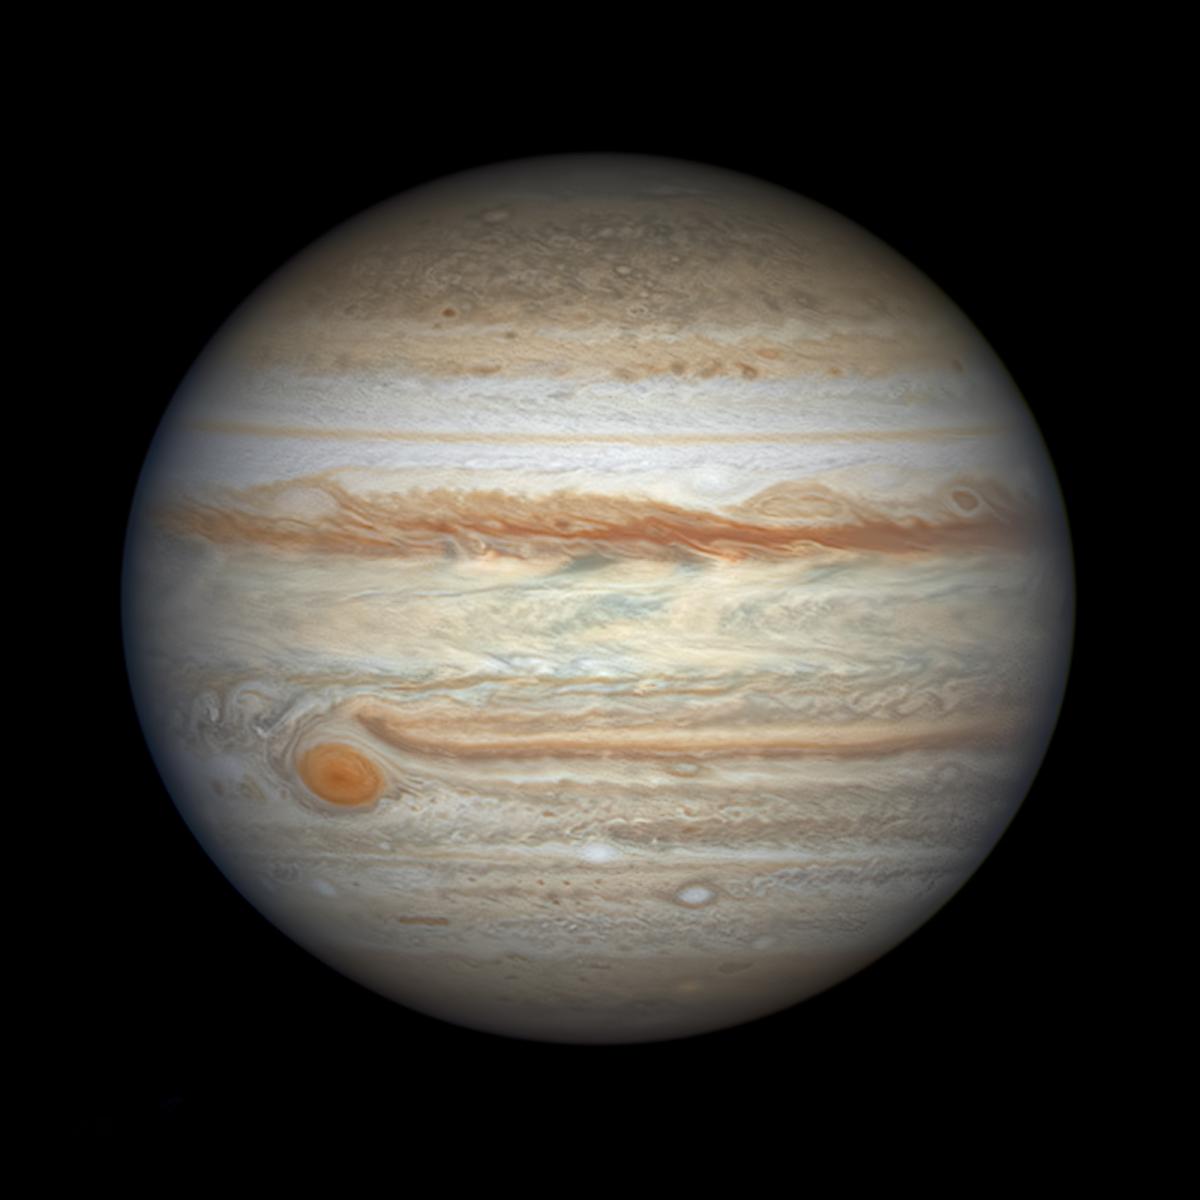 A close-up telescope view of the planet Jupiter, showing the planets swirling gases in remarkable detail. Swirling orange lines move horizontally across the planet's surface, along with hazy bands of yellow and white